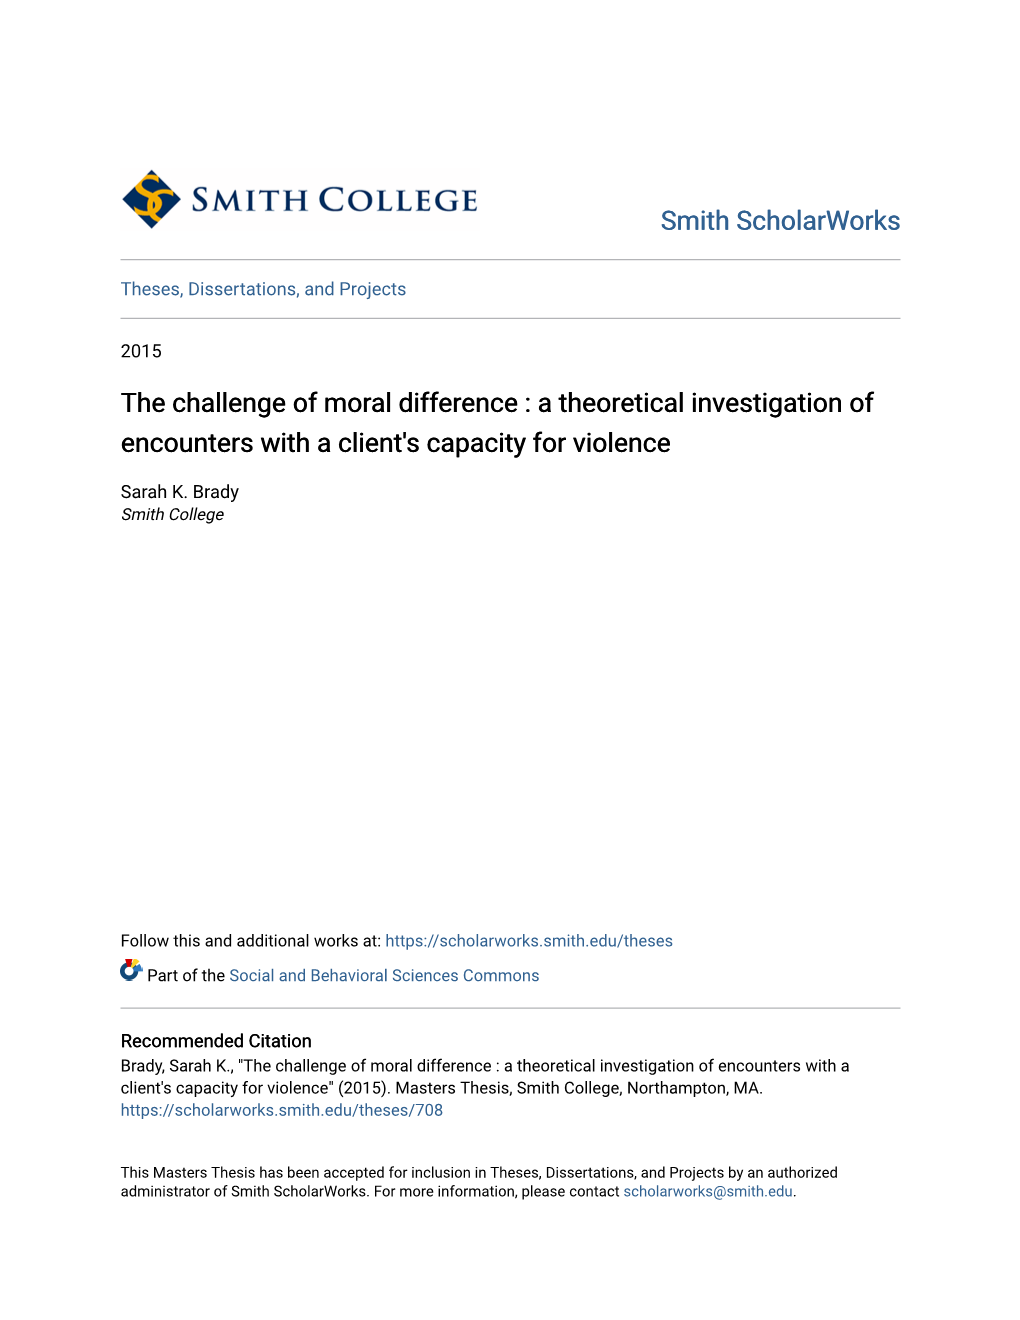 The Challenge of Moral Difference : a Theoretical Investigation of Encounters with a Client's Capacity for Violence